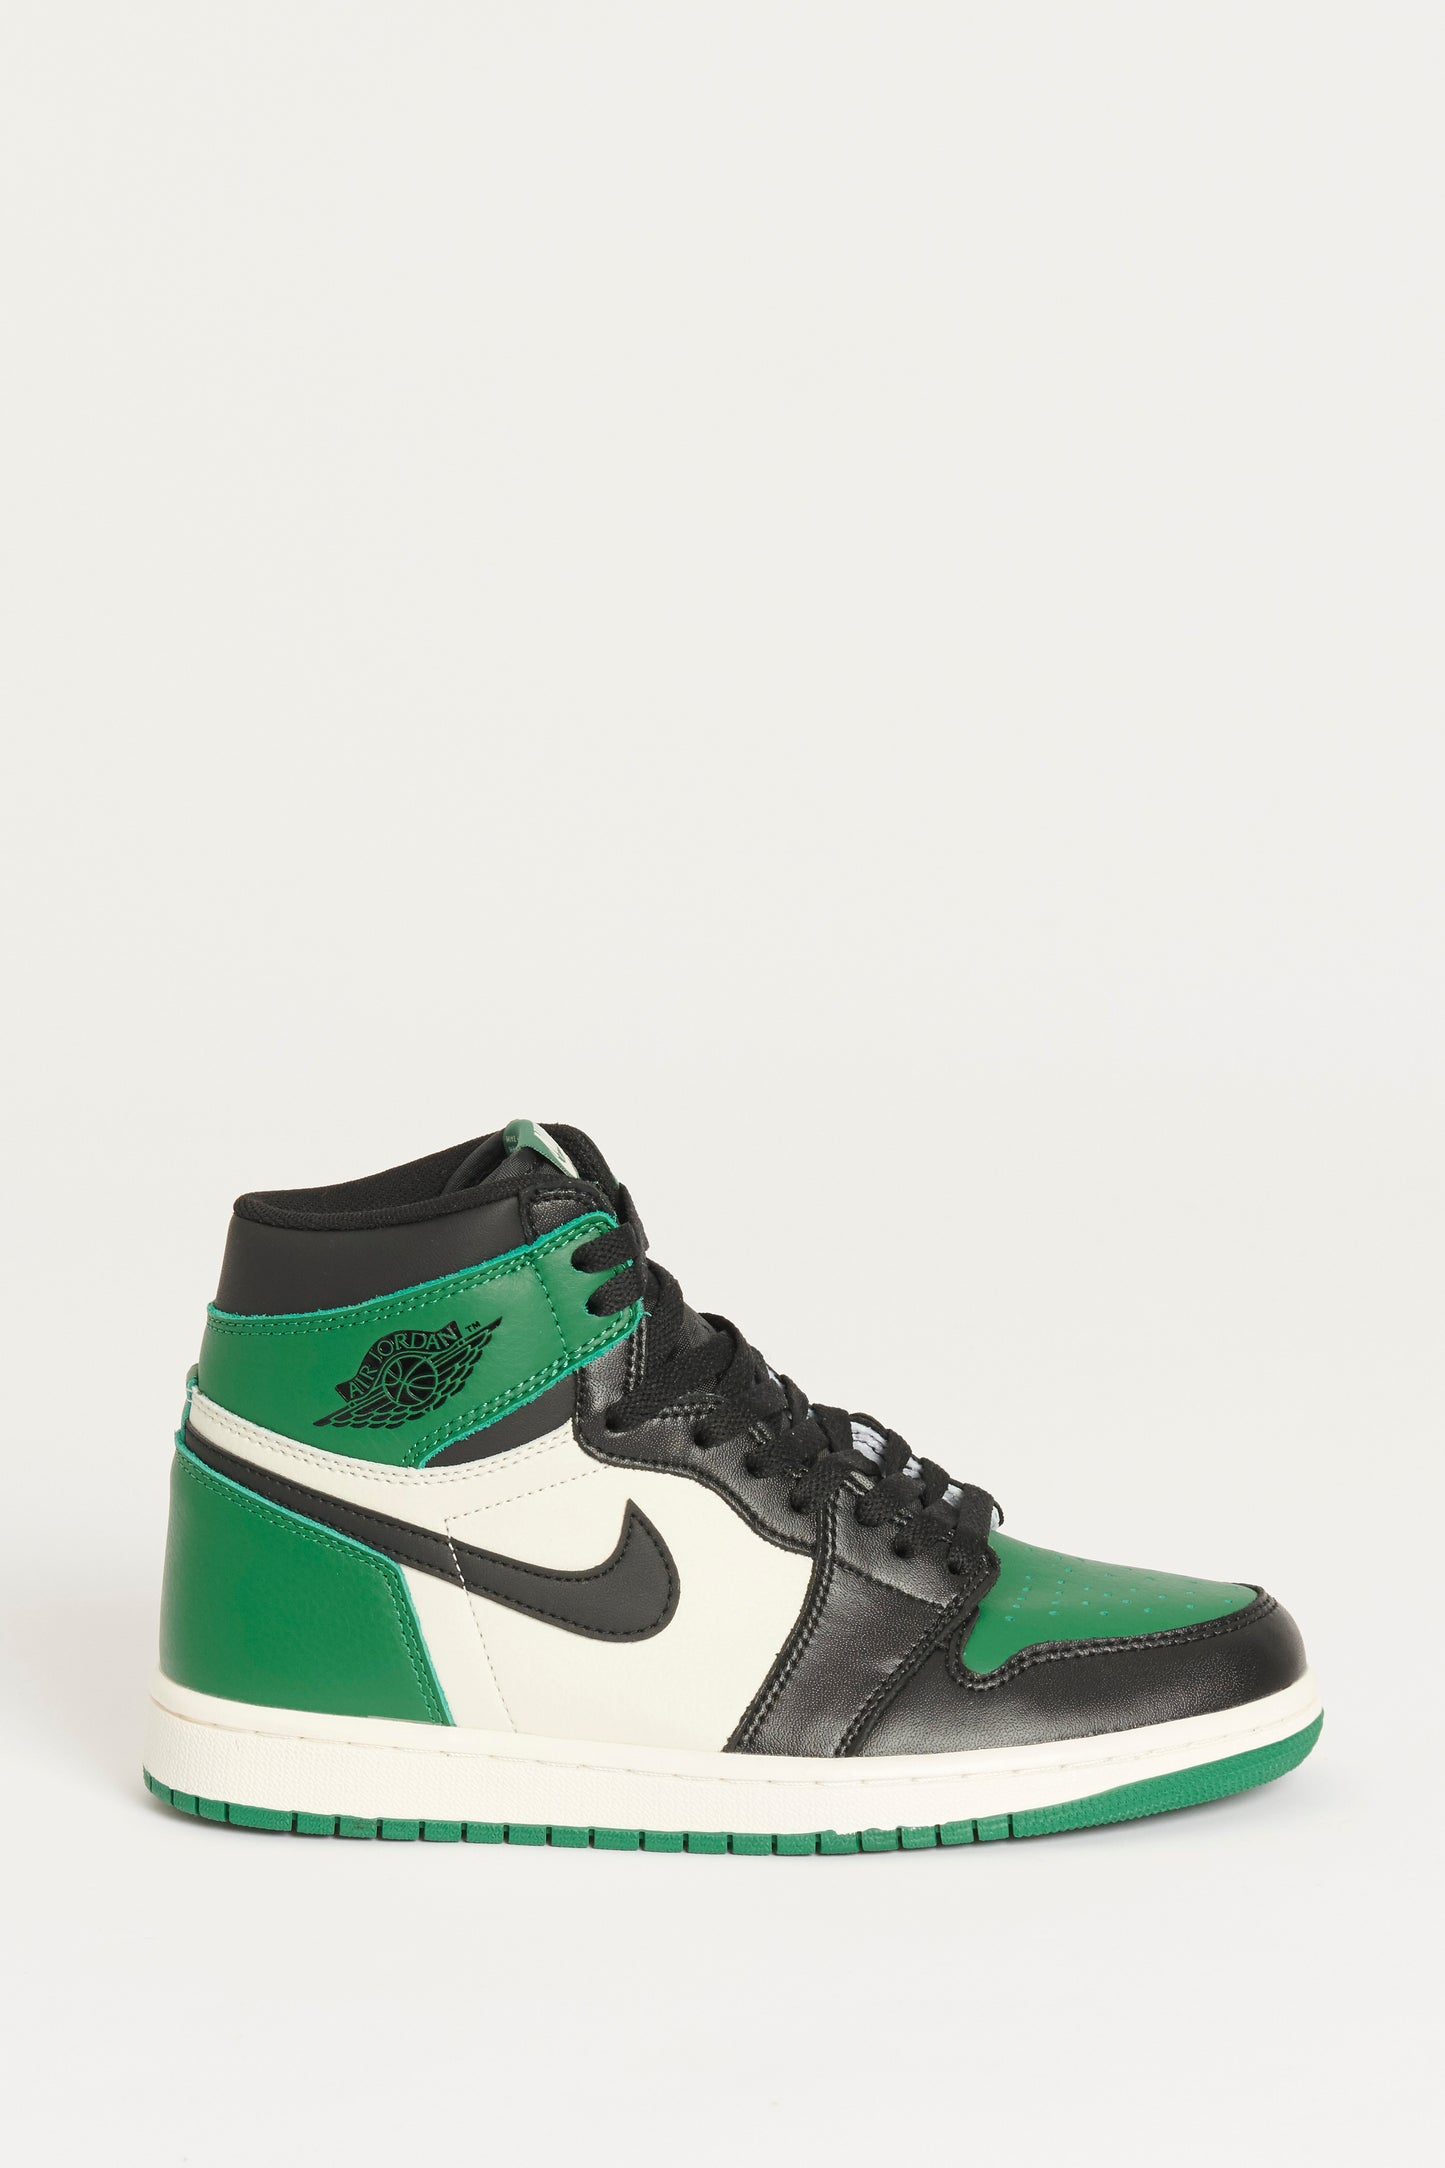 Pine Green Leather Air Jordans 1 Retro High Top Preowned Trainers